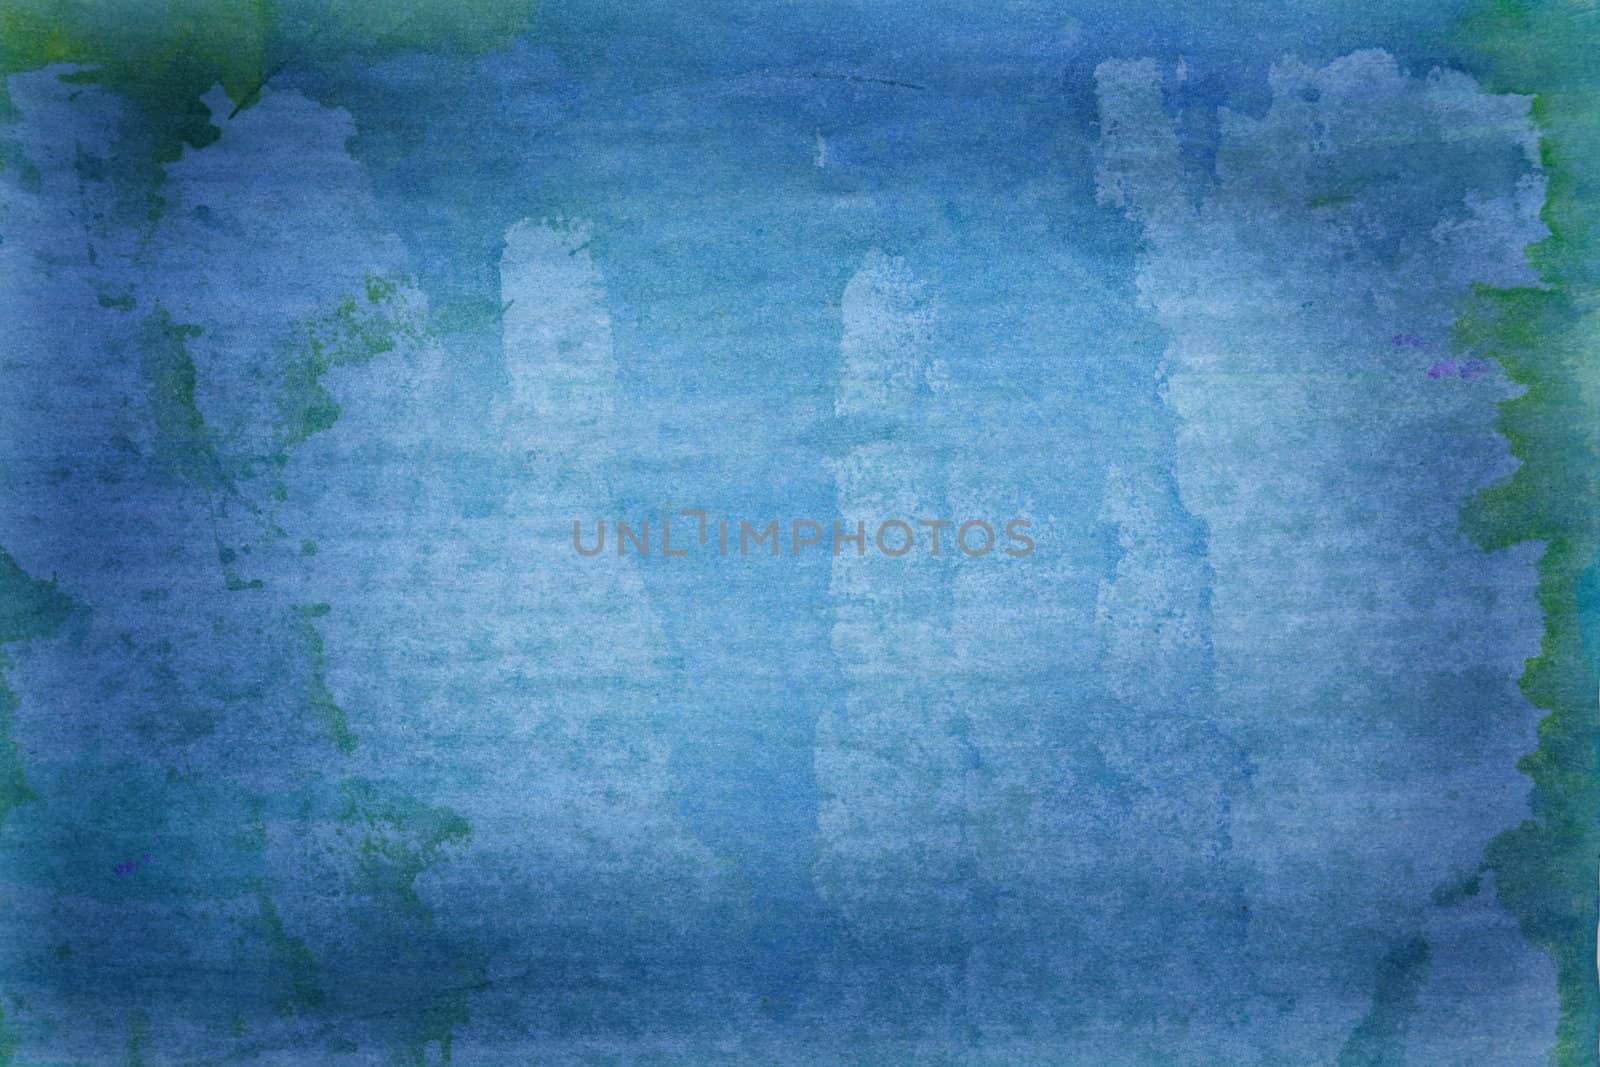 Beautiful grunge blue background with paint smears